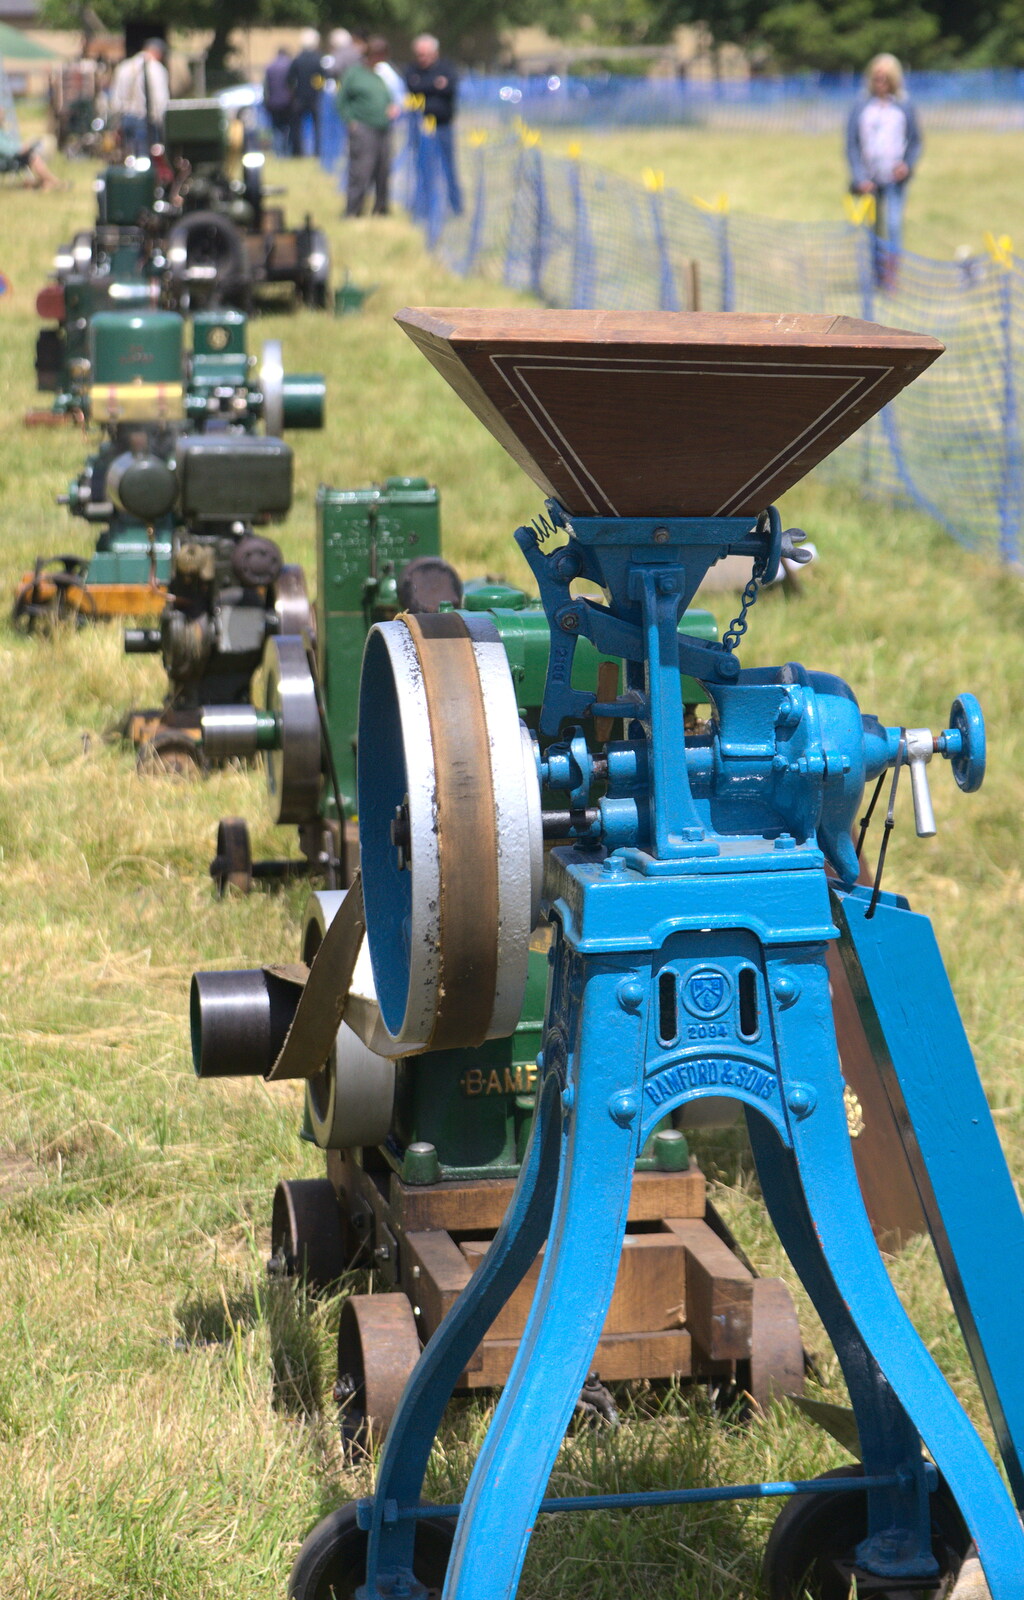 Lister engines phut-phuting away all day from A Vintage Tractorey Sort of Day, Palgrave, Suffolk - 21st June 2015